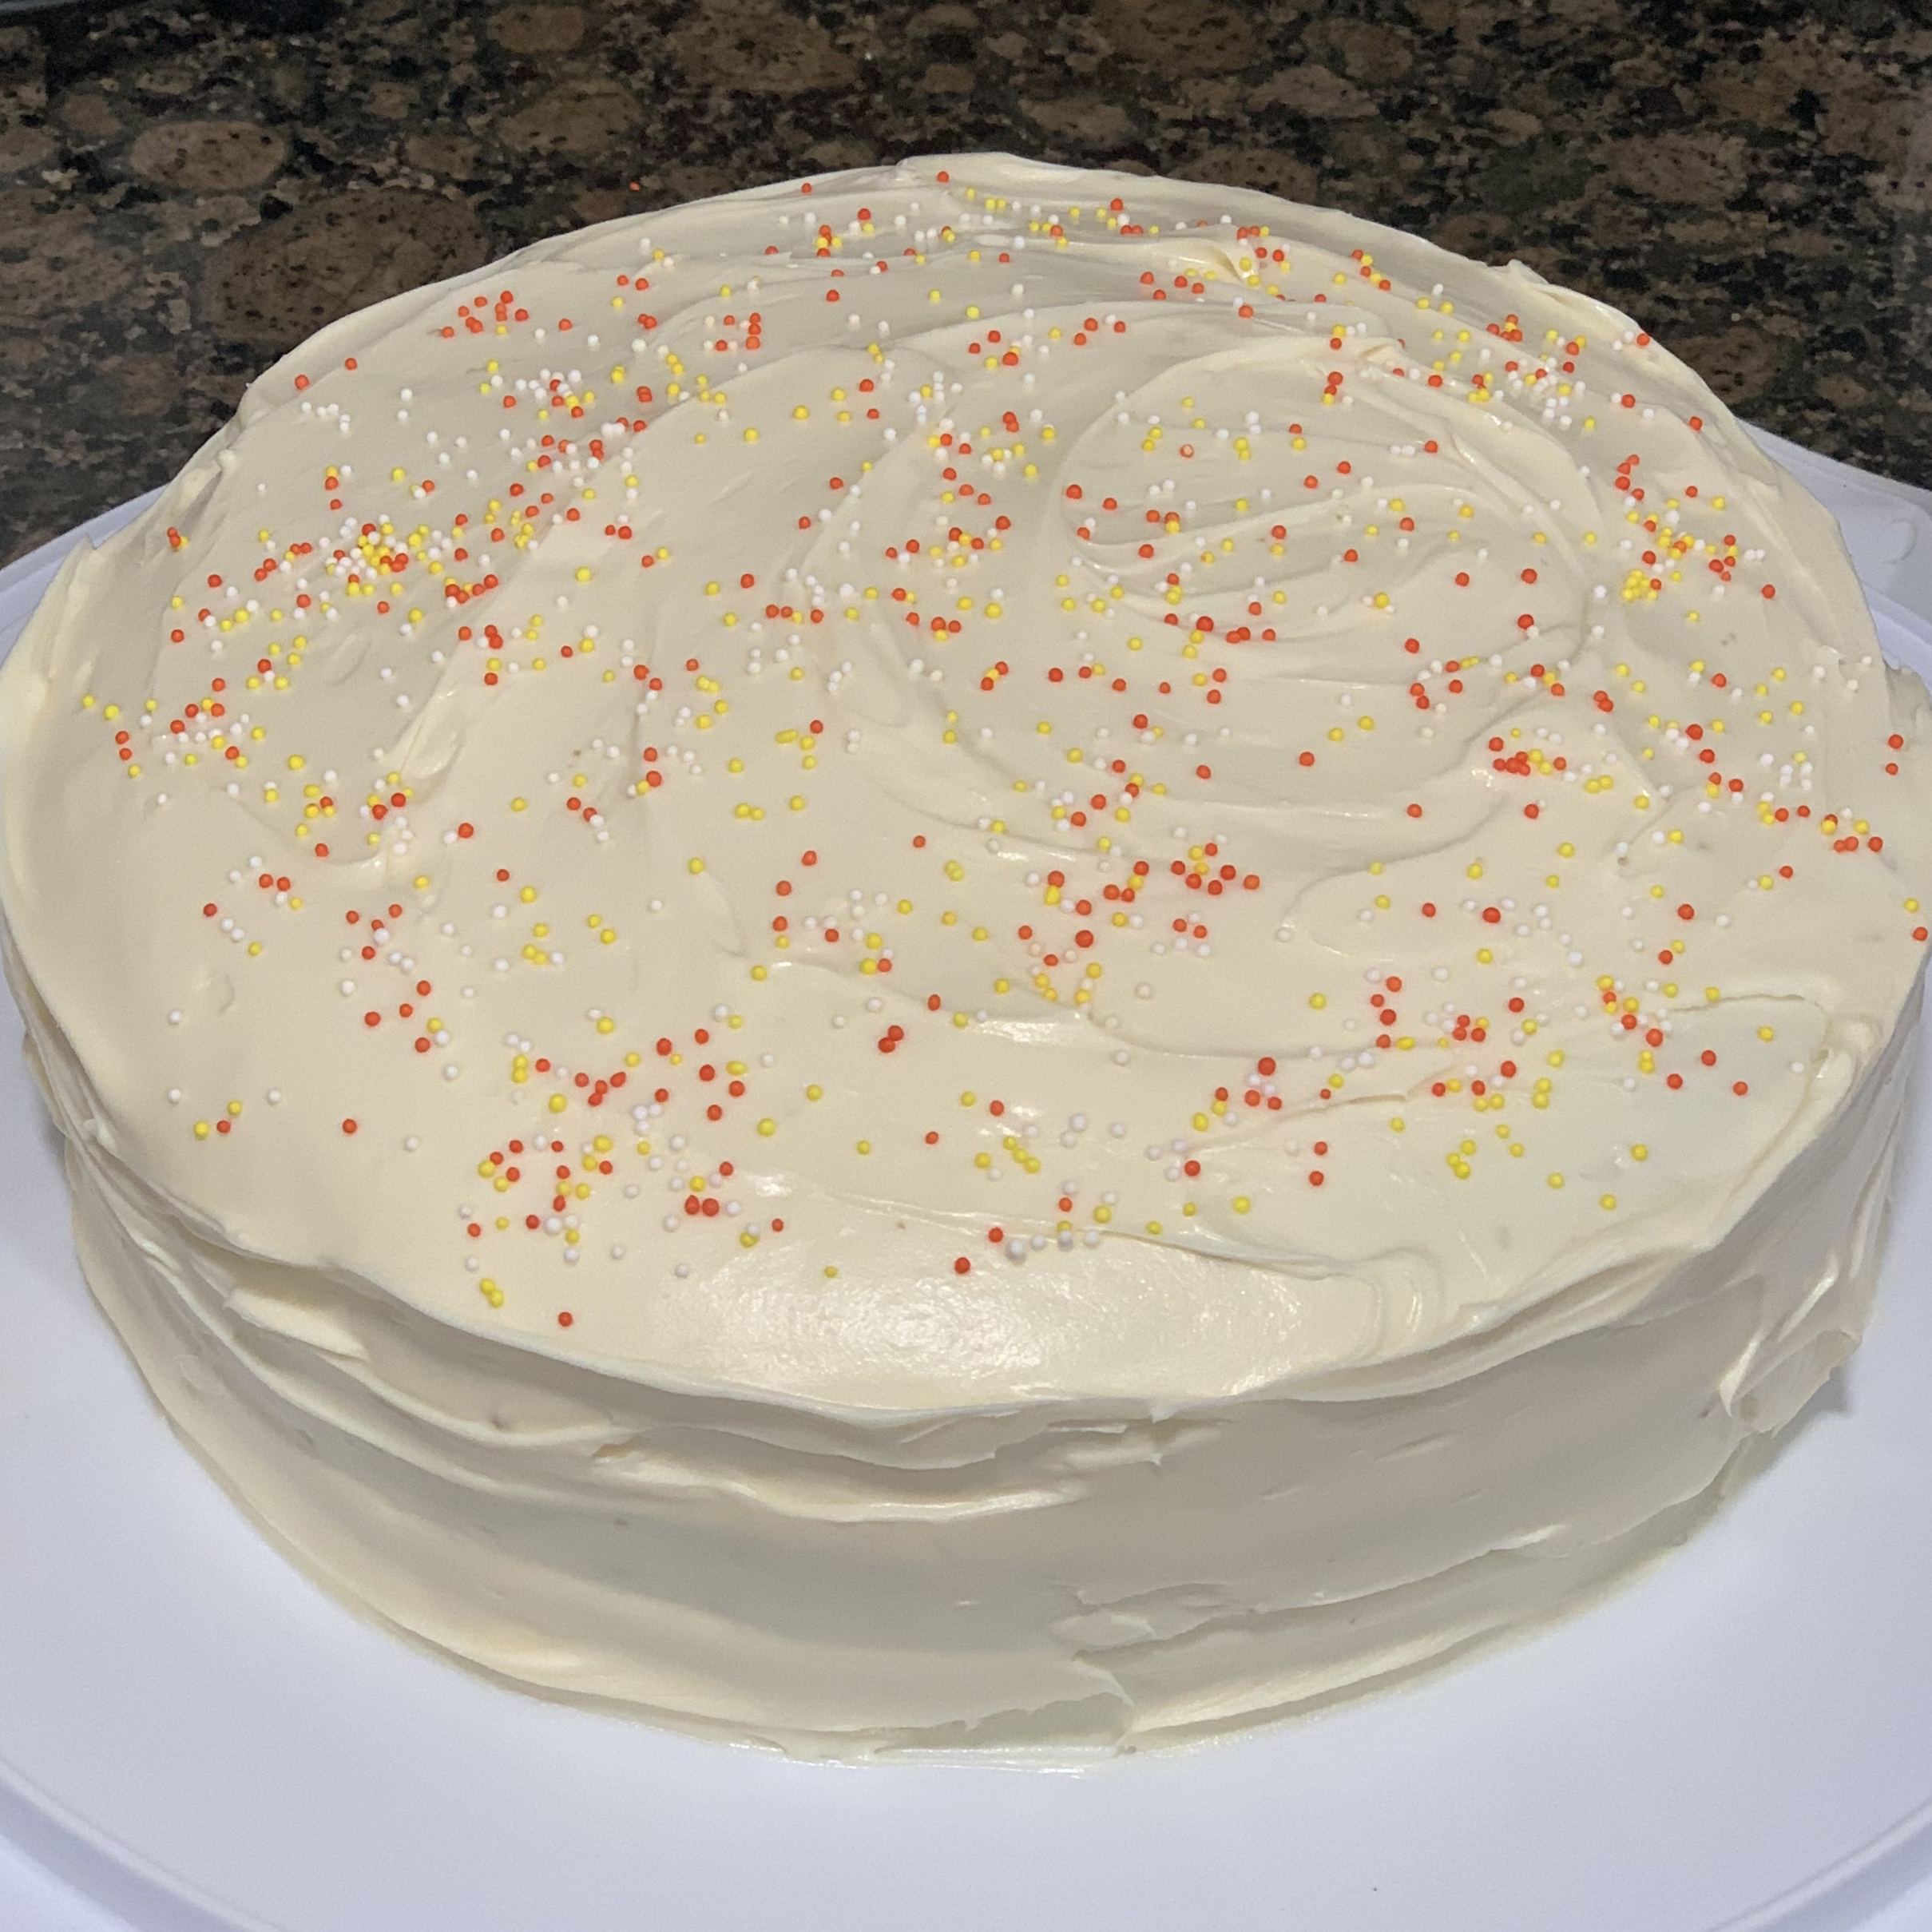 Awesome Carrot Cake with Cream Cheese Frosting Stacy Chase